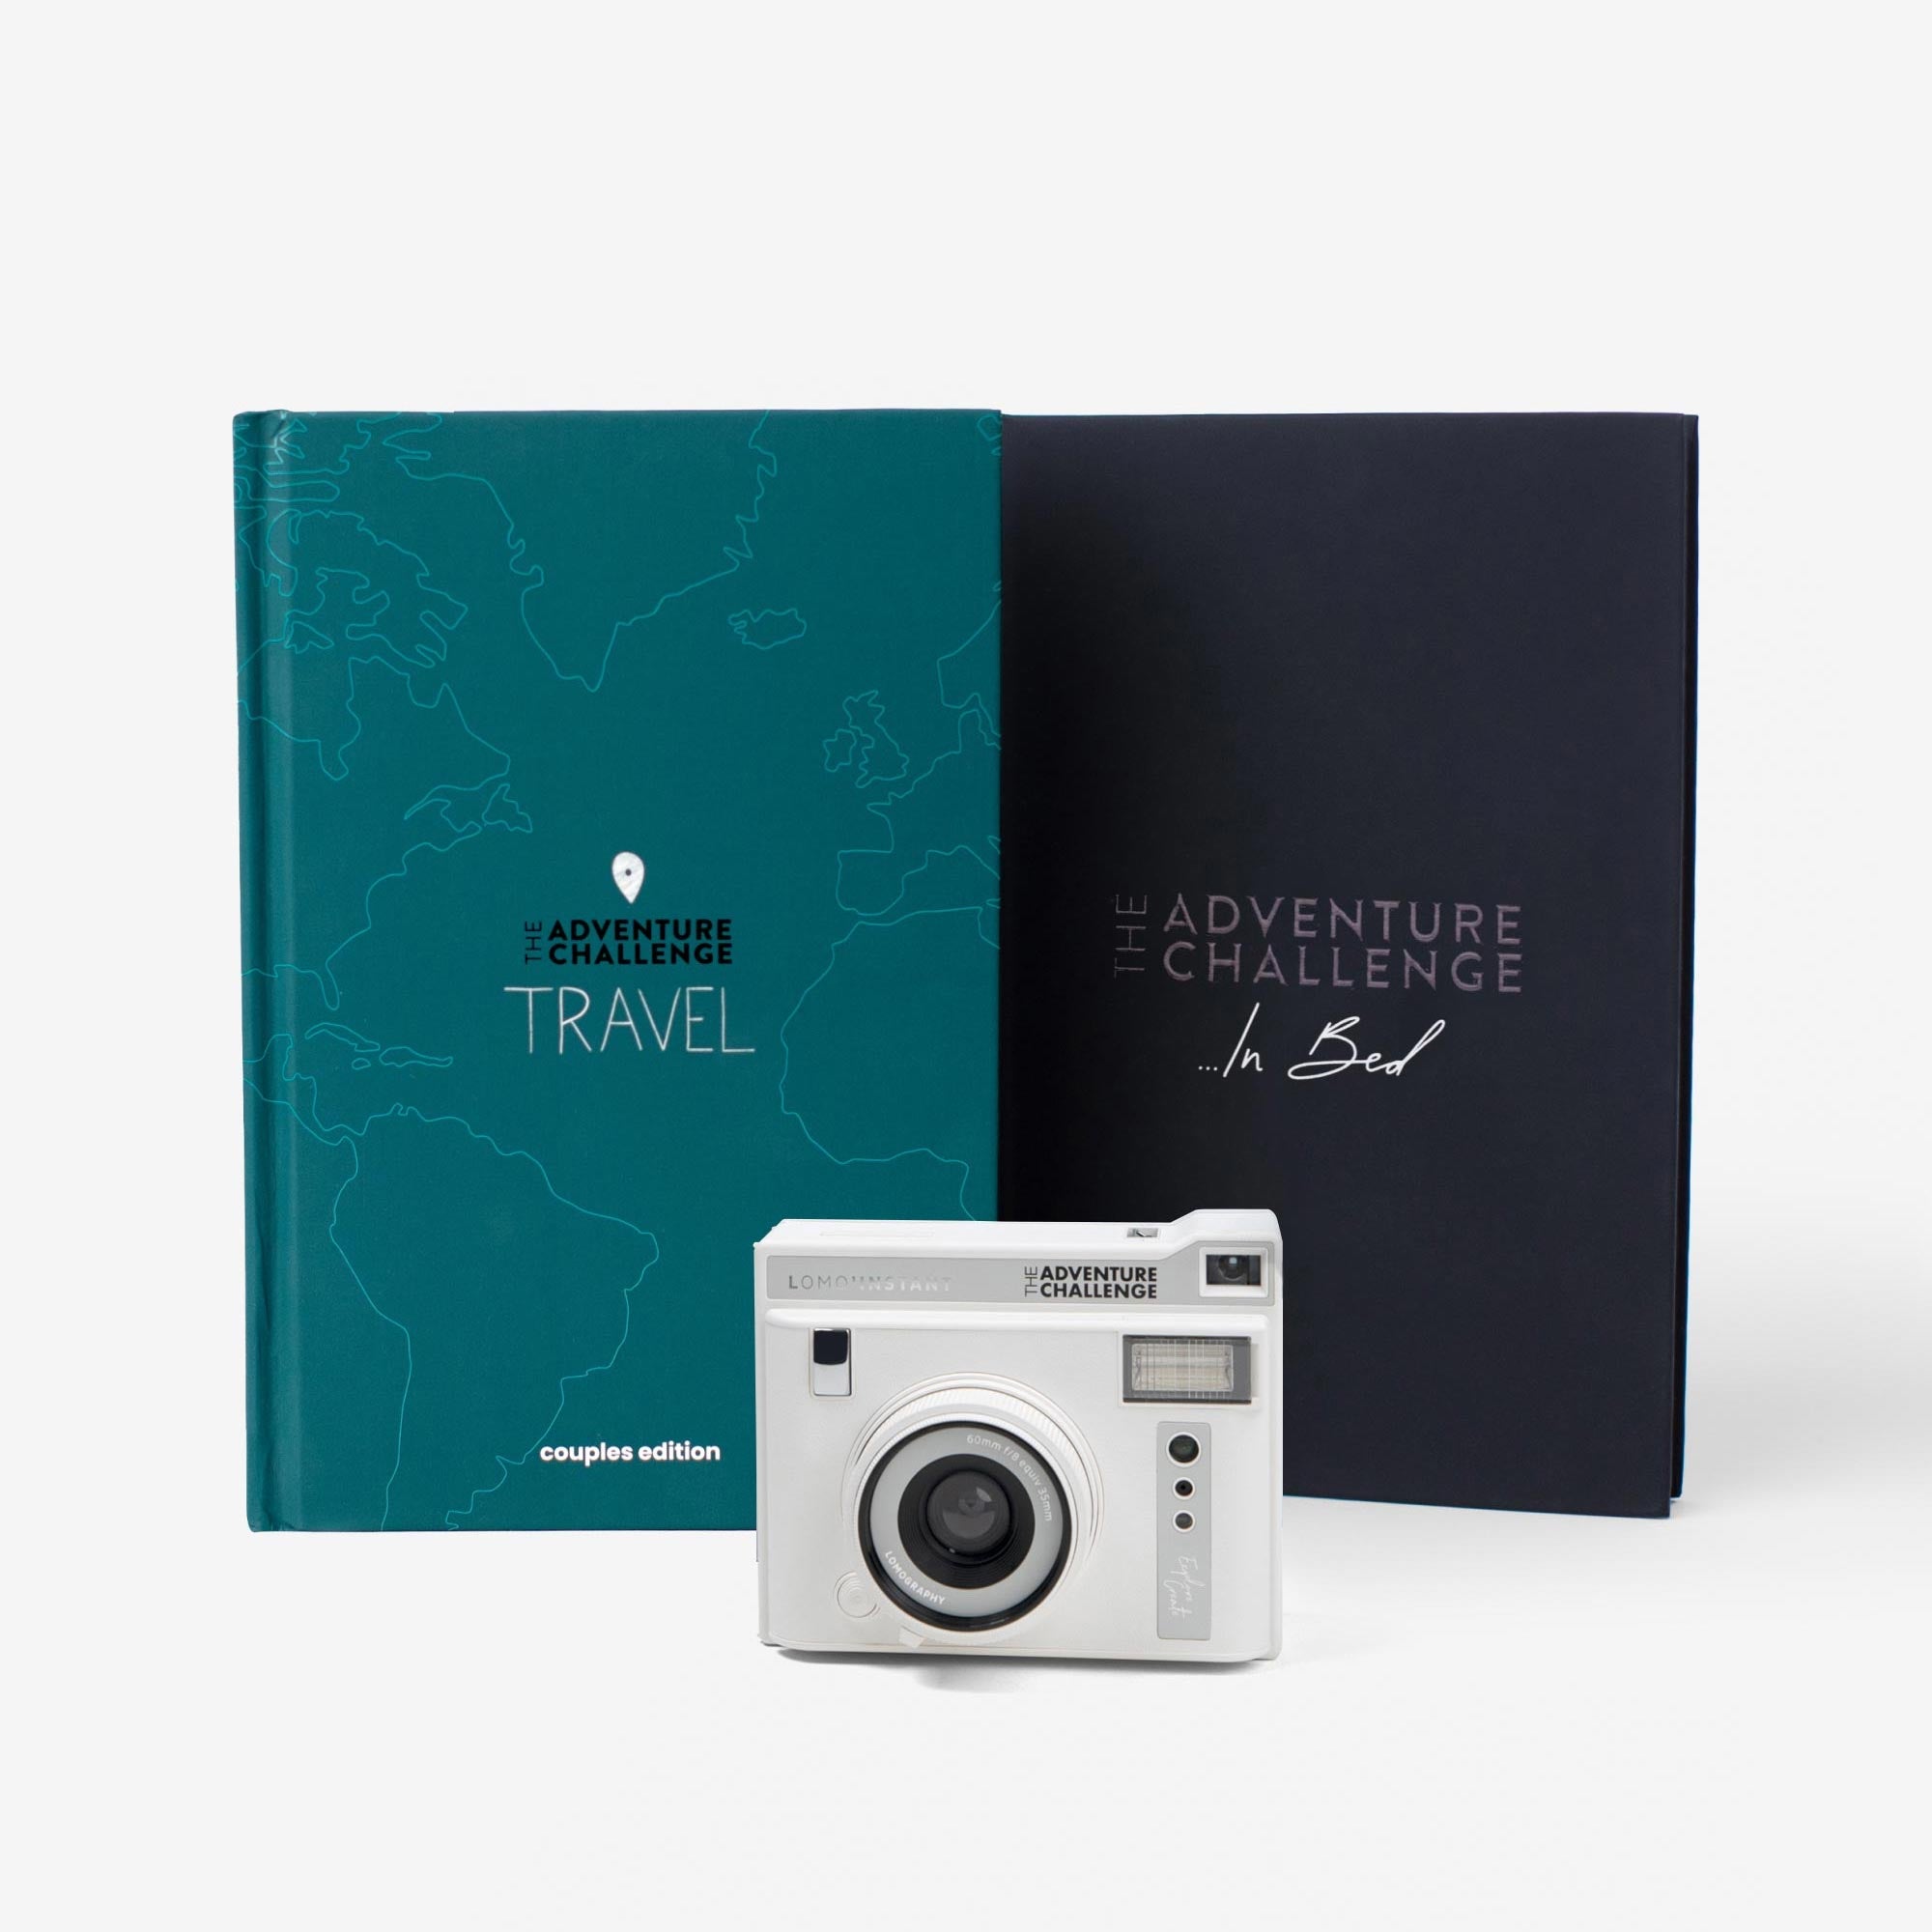 Travel and ...In Bed Camera Bundle